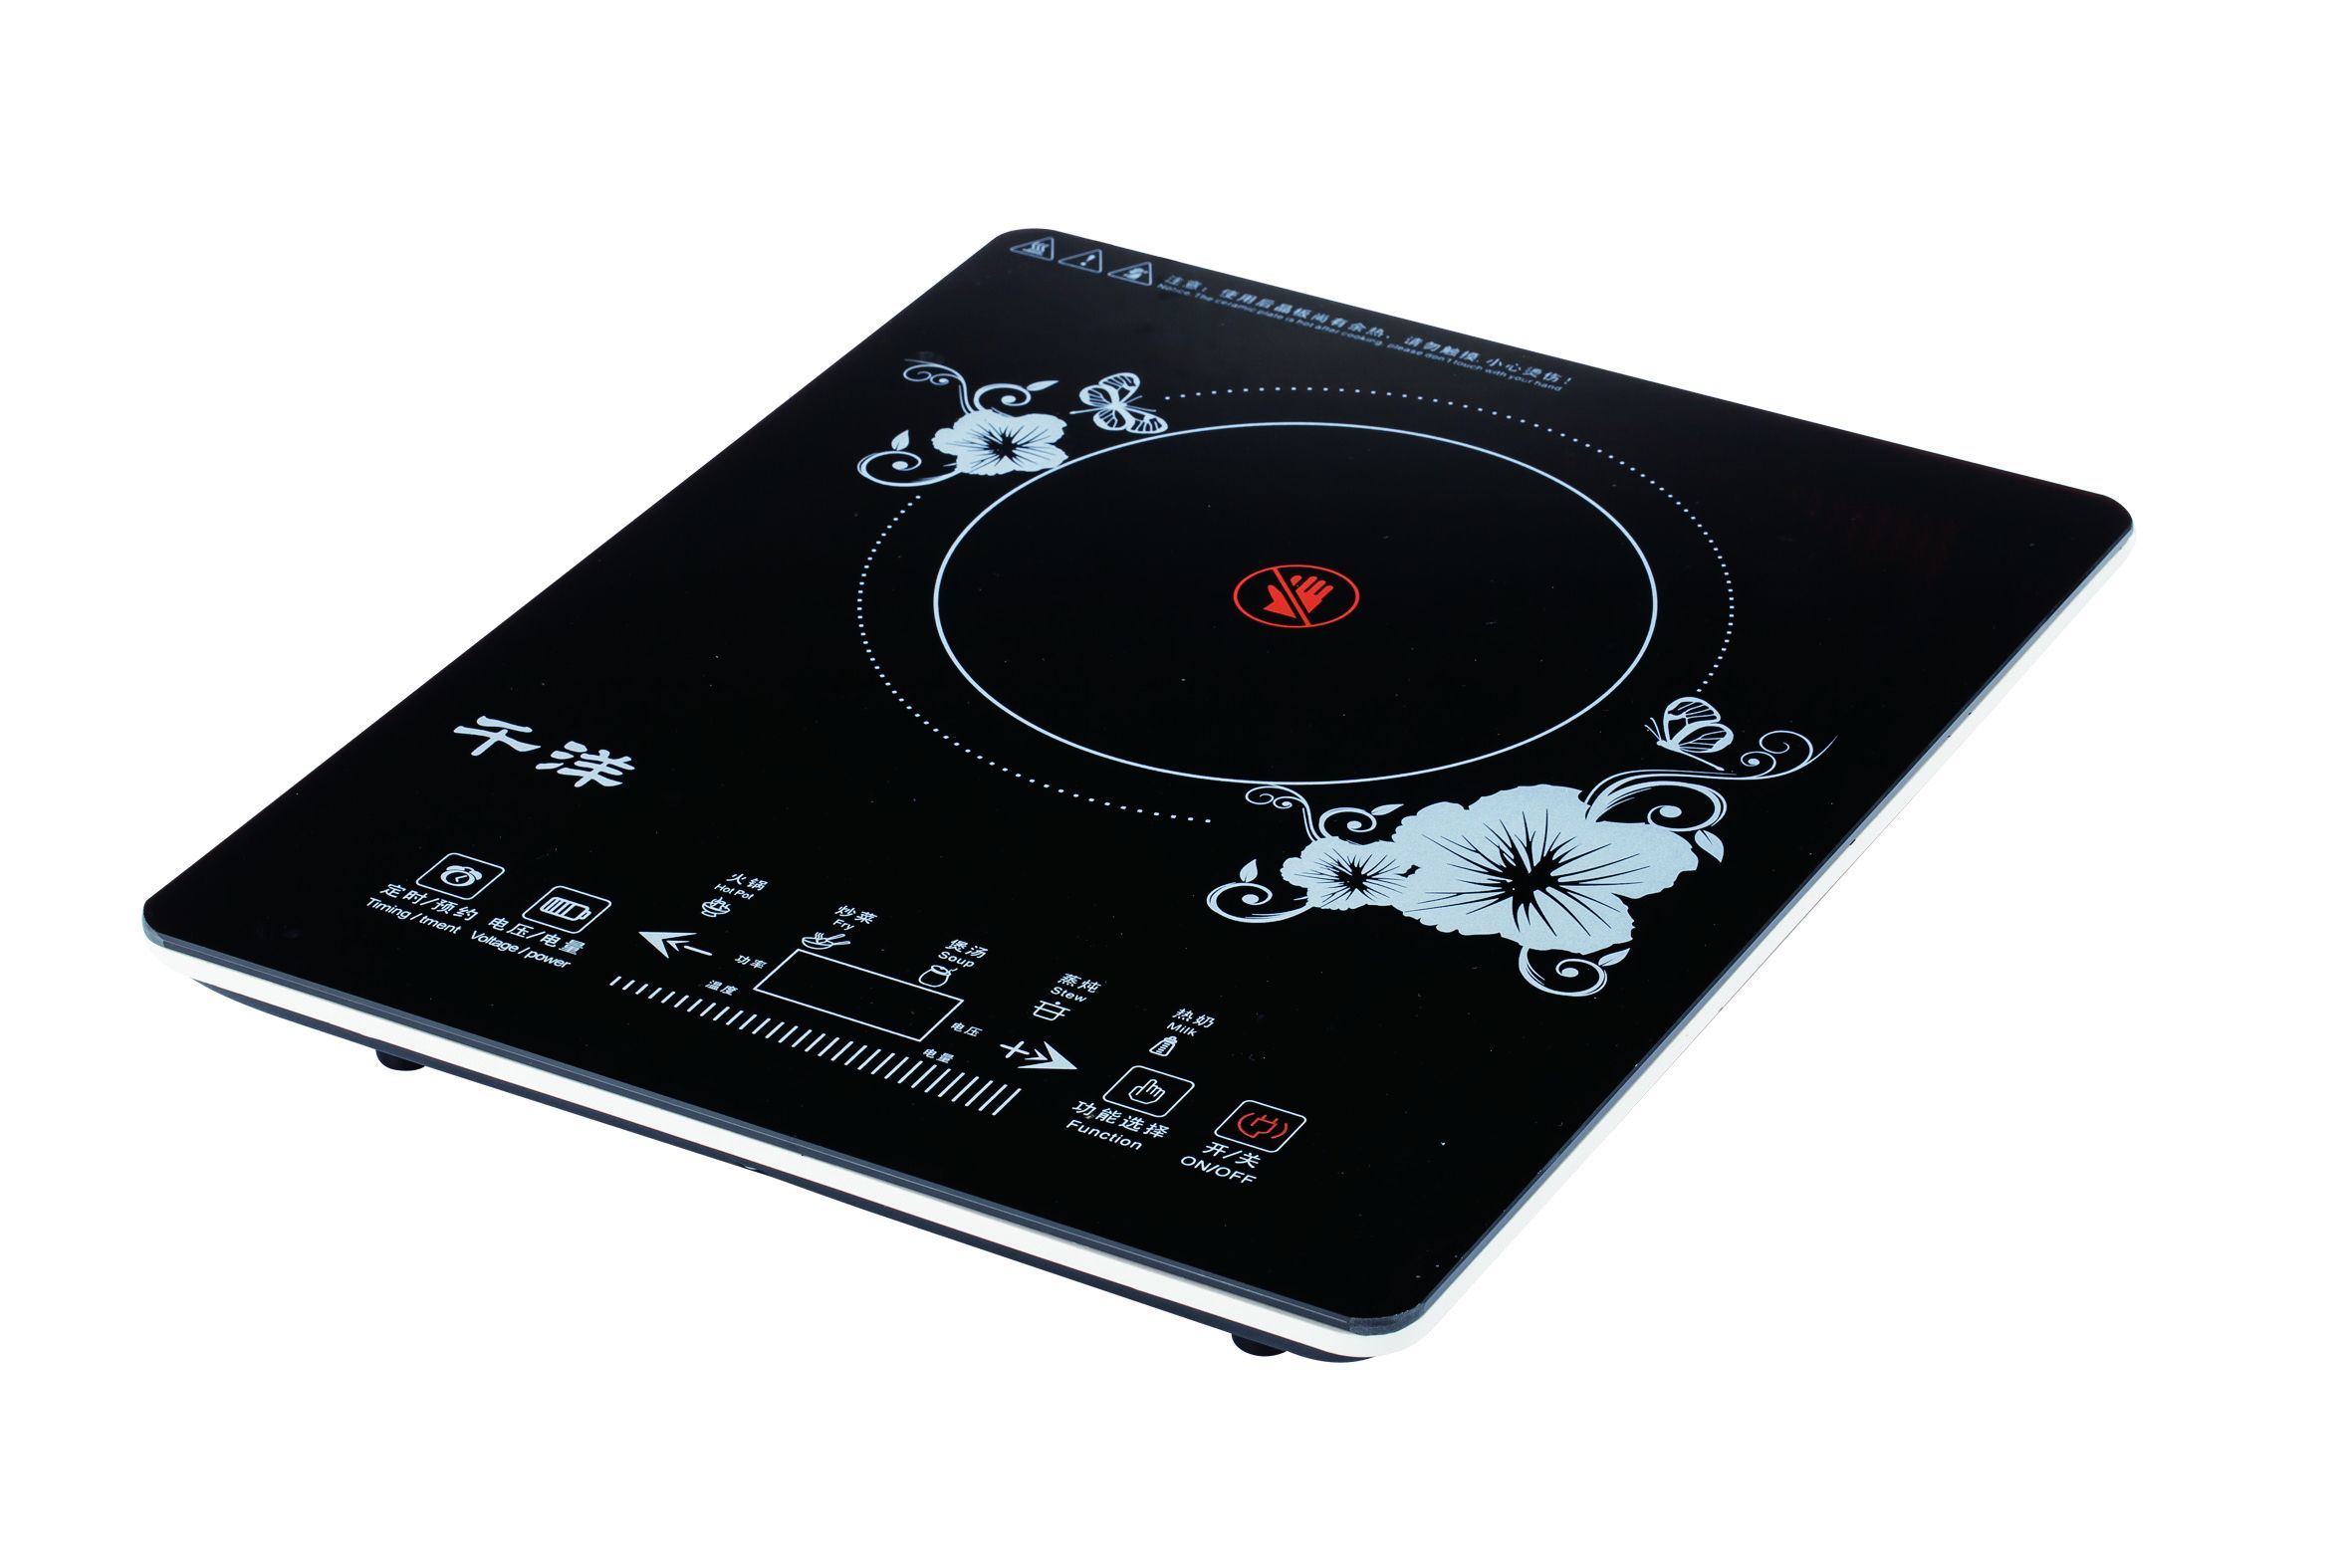 Supper Slim Induction Cooker Household Appliance